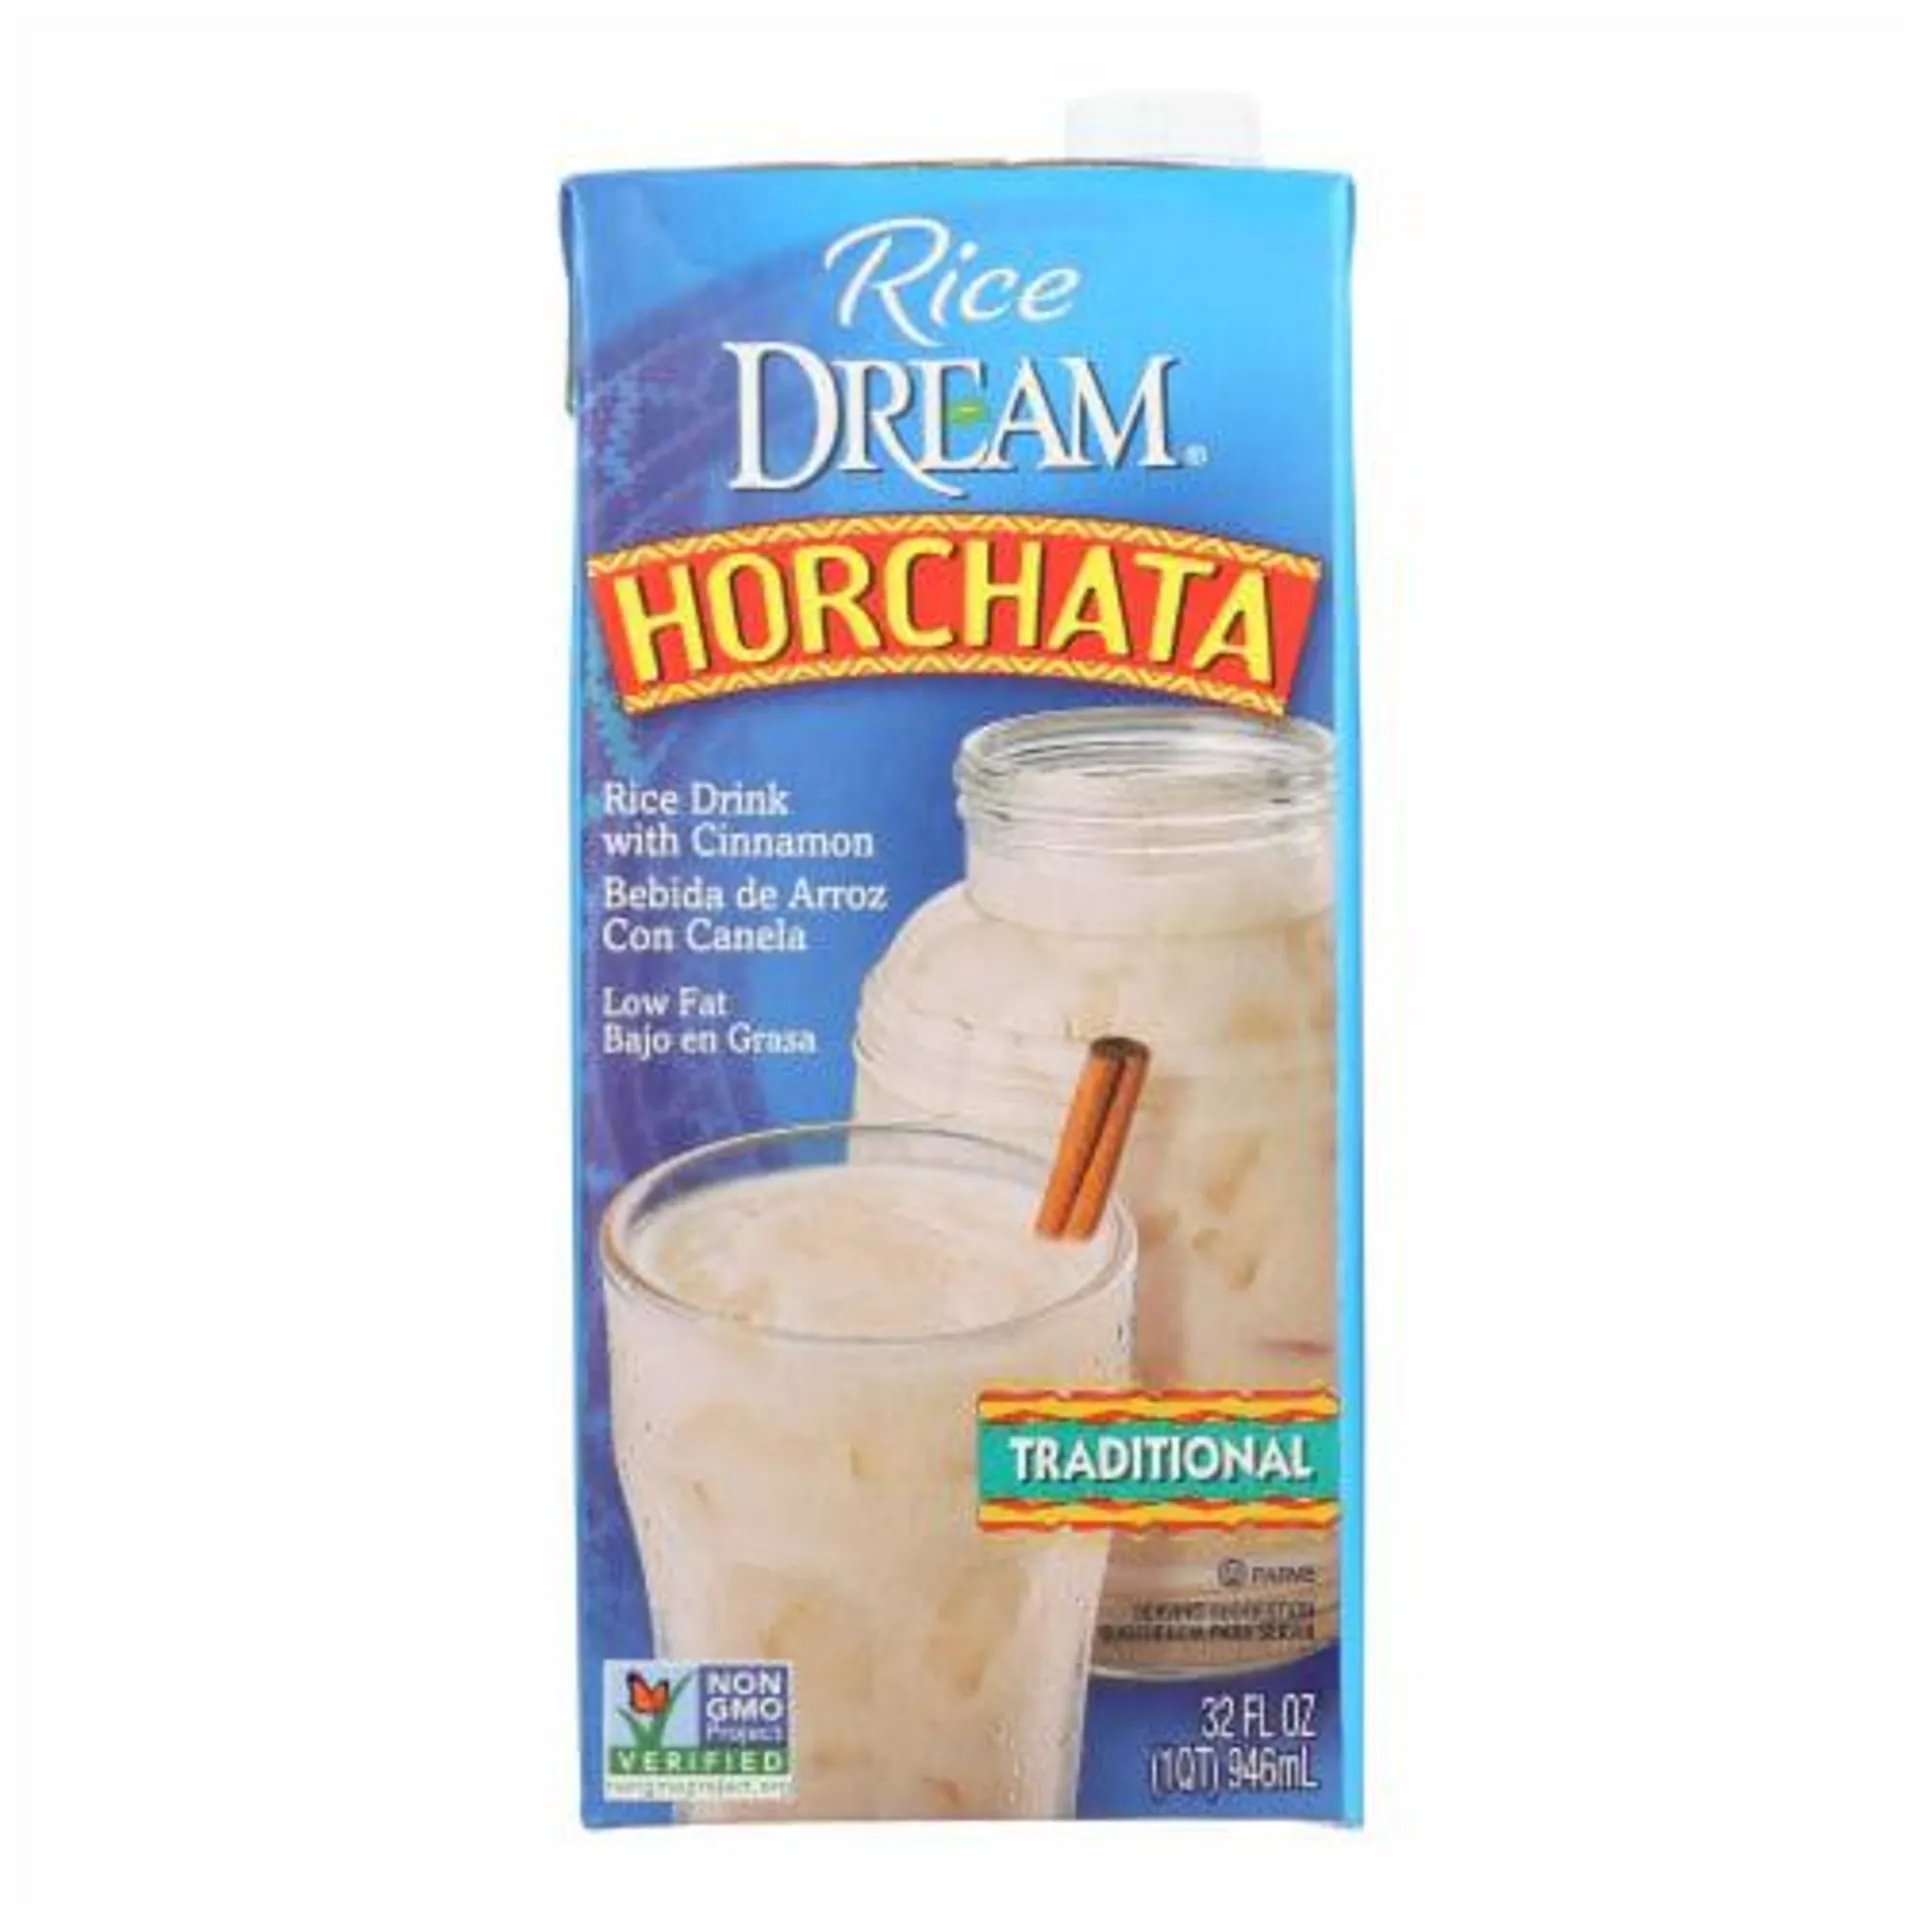 Rice Dream Horchata Traditional - 32 Fl. oz (Pack of 6)